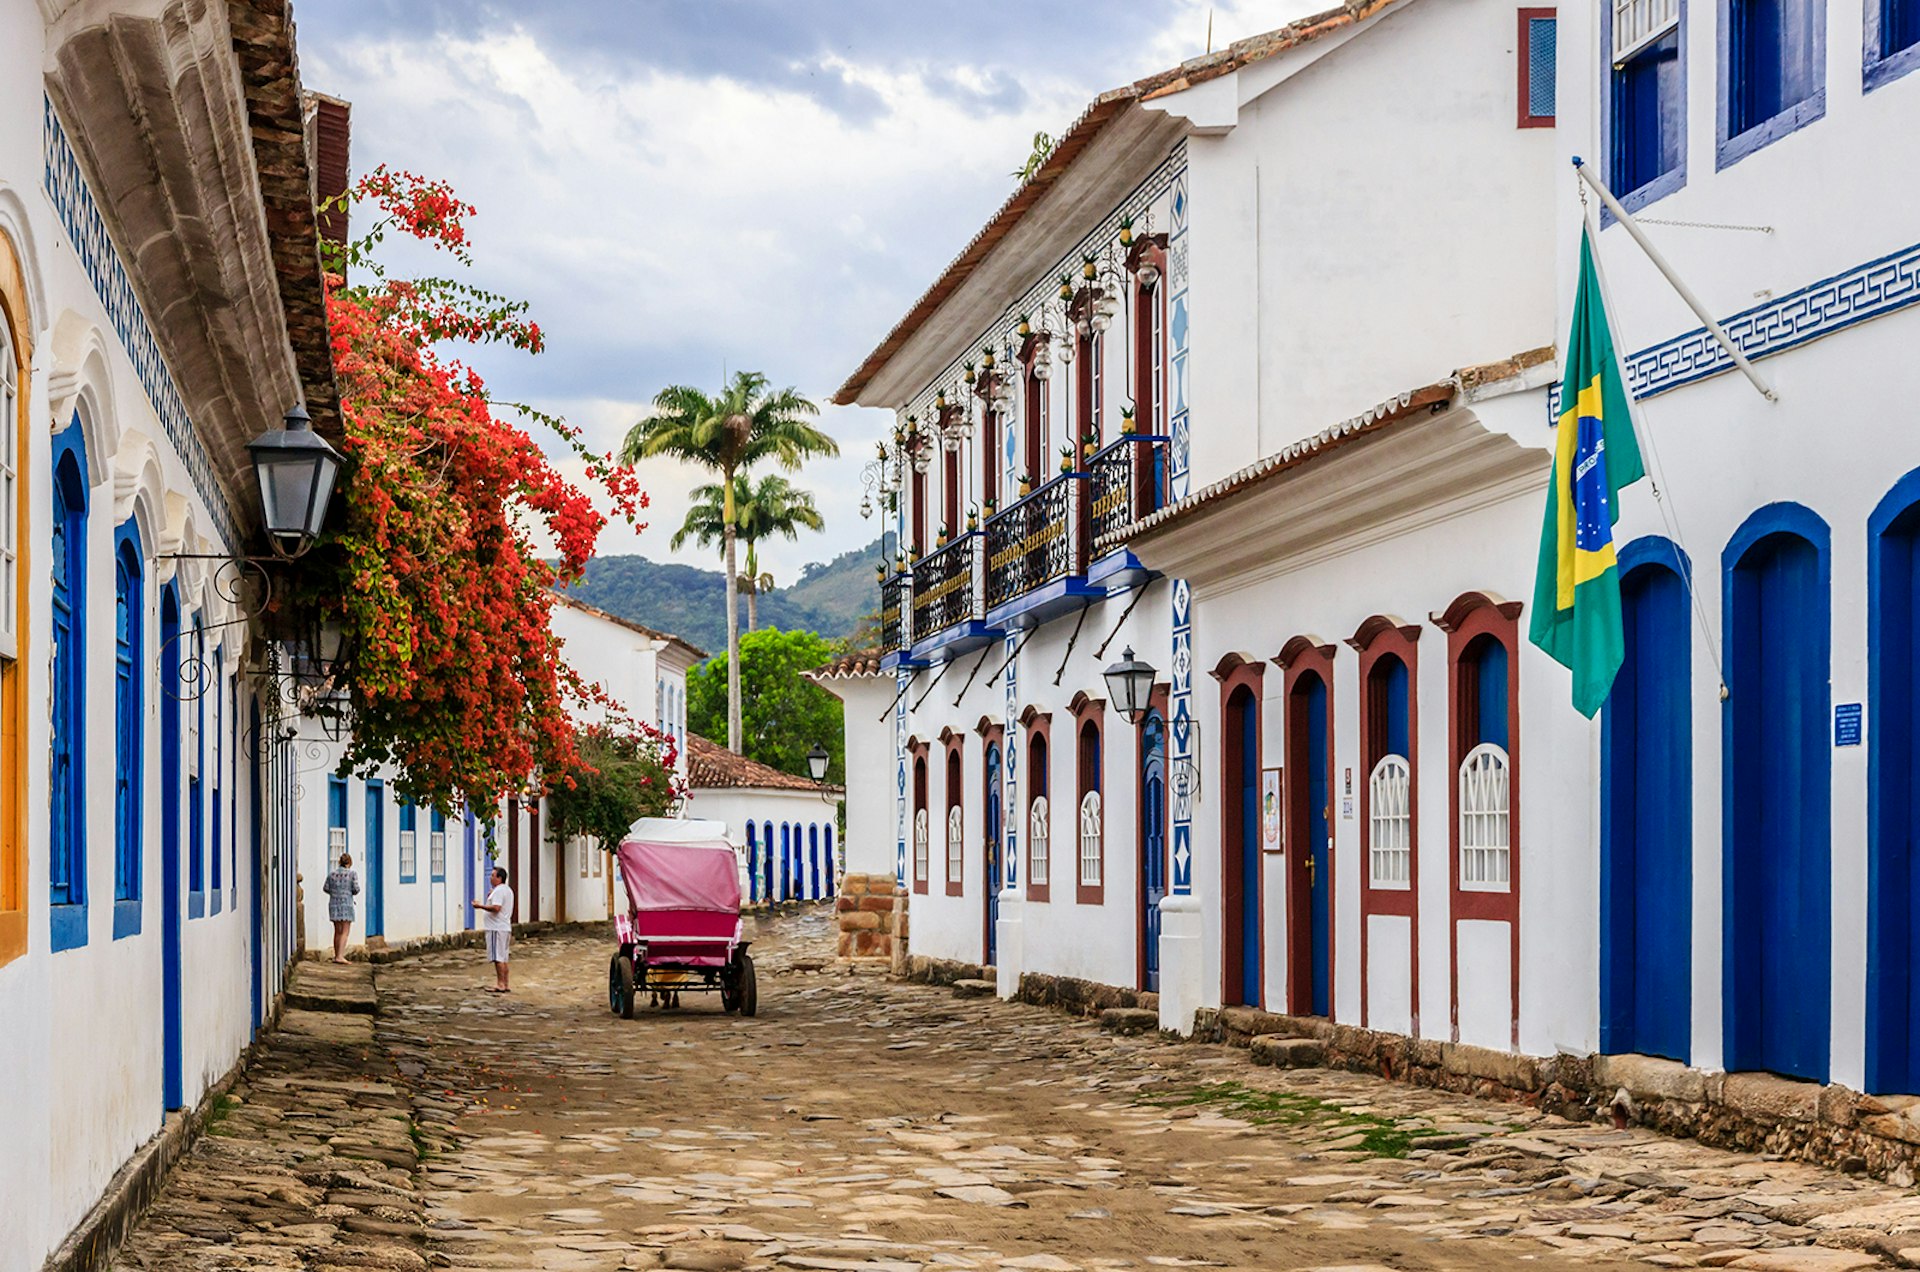 A carriage drives down a cobblestone street in Paraty